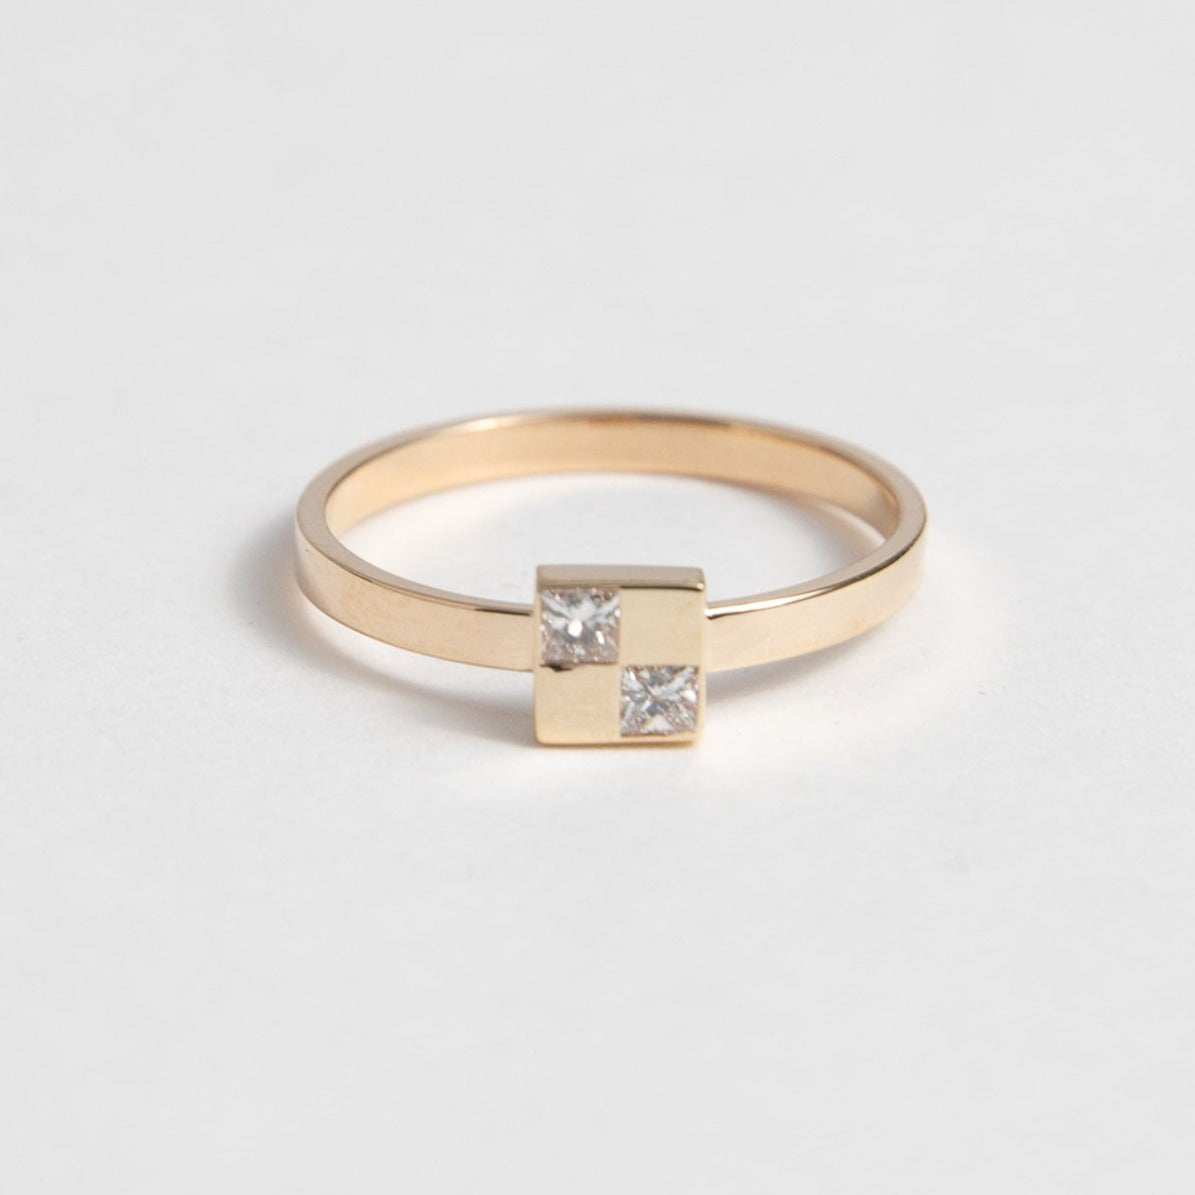 Sudu Cool Ring in 14k Yellow Gold set with princess cut square diamonds by SHW Fine Jewelry in NYC